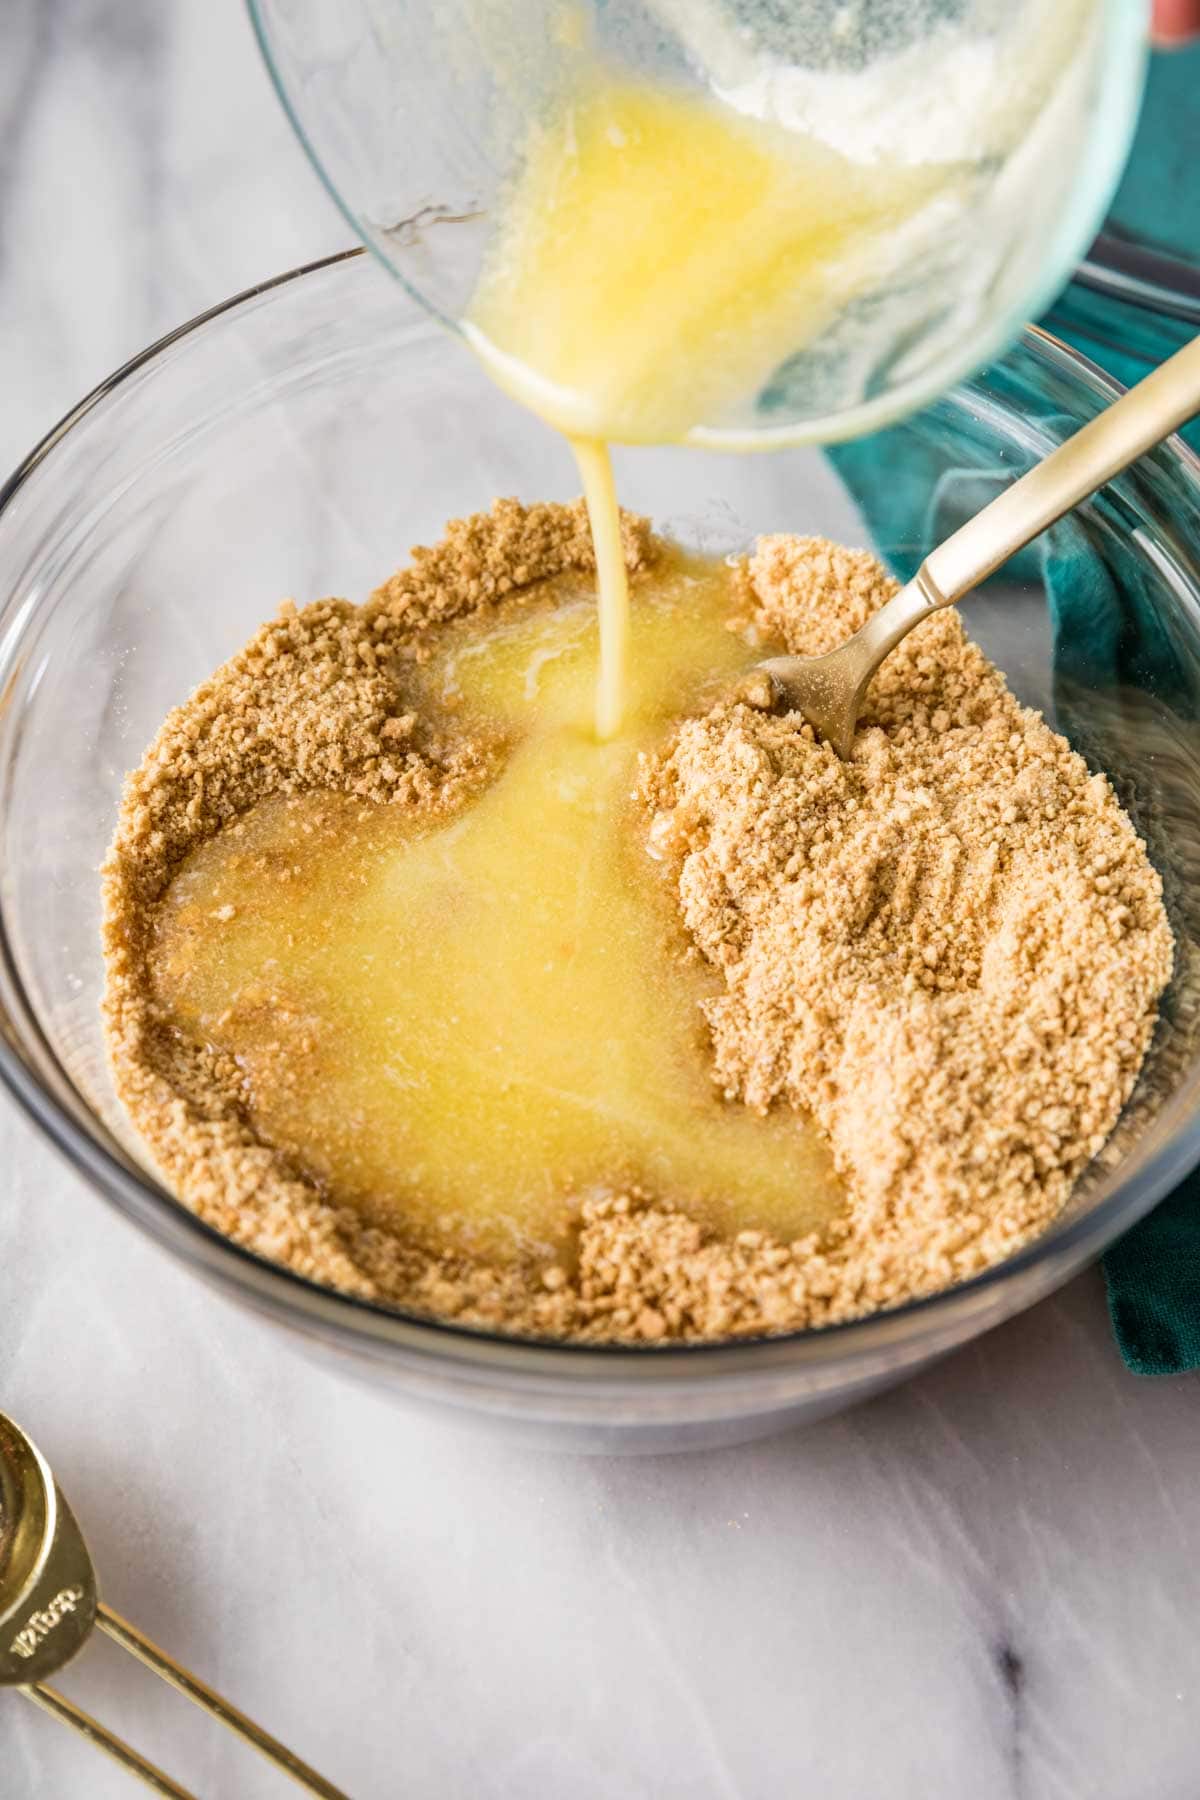 Melted butter being poured into graham cracker crumbs.